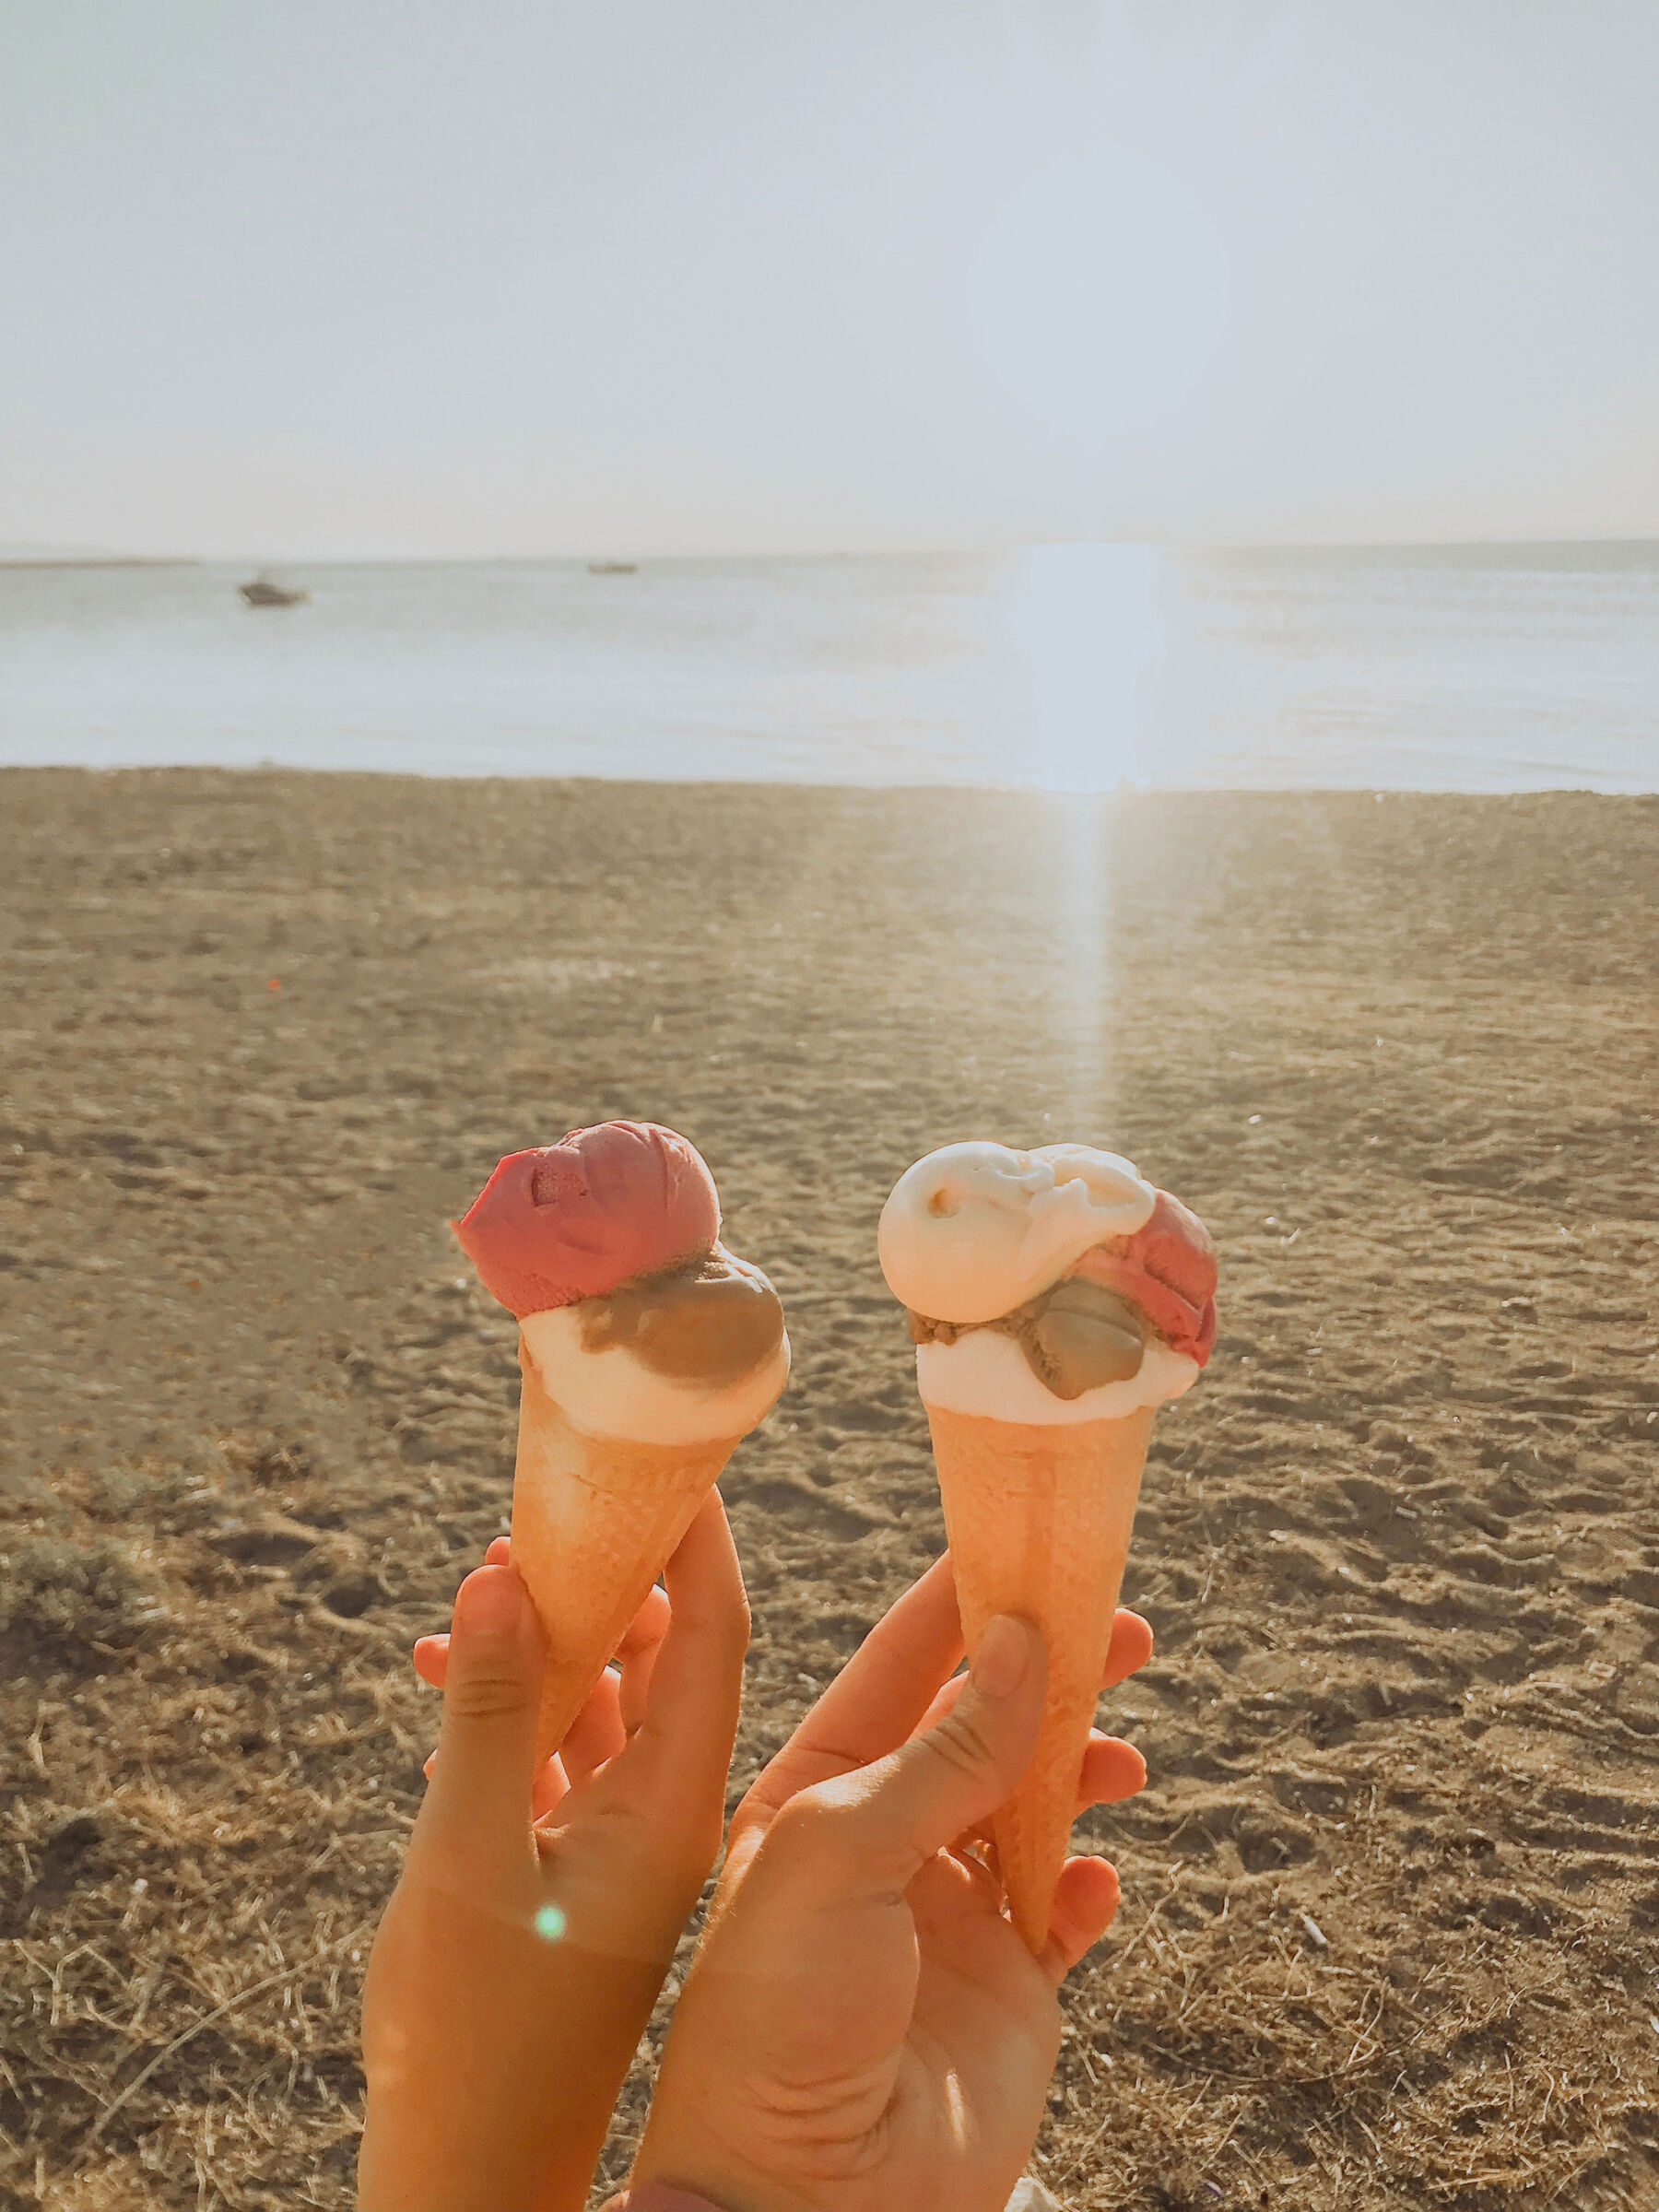 Patchwork alternative wedding gift registry - two icecream cones being held up in the sunshine on the beach.